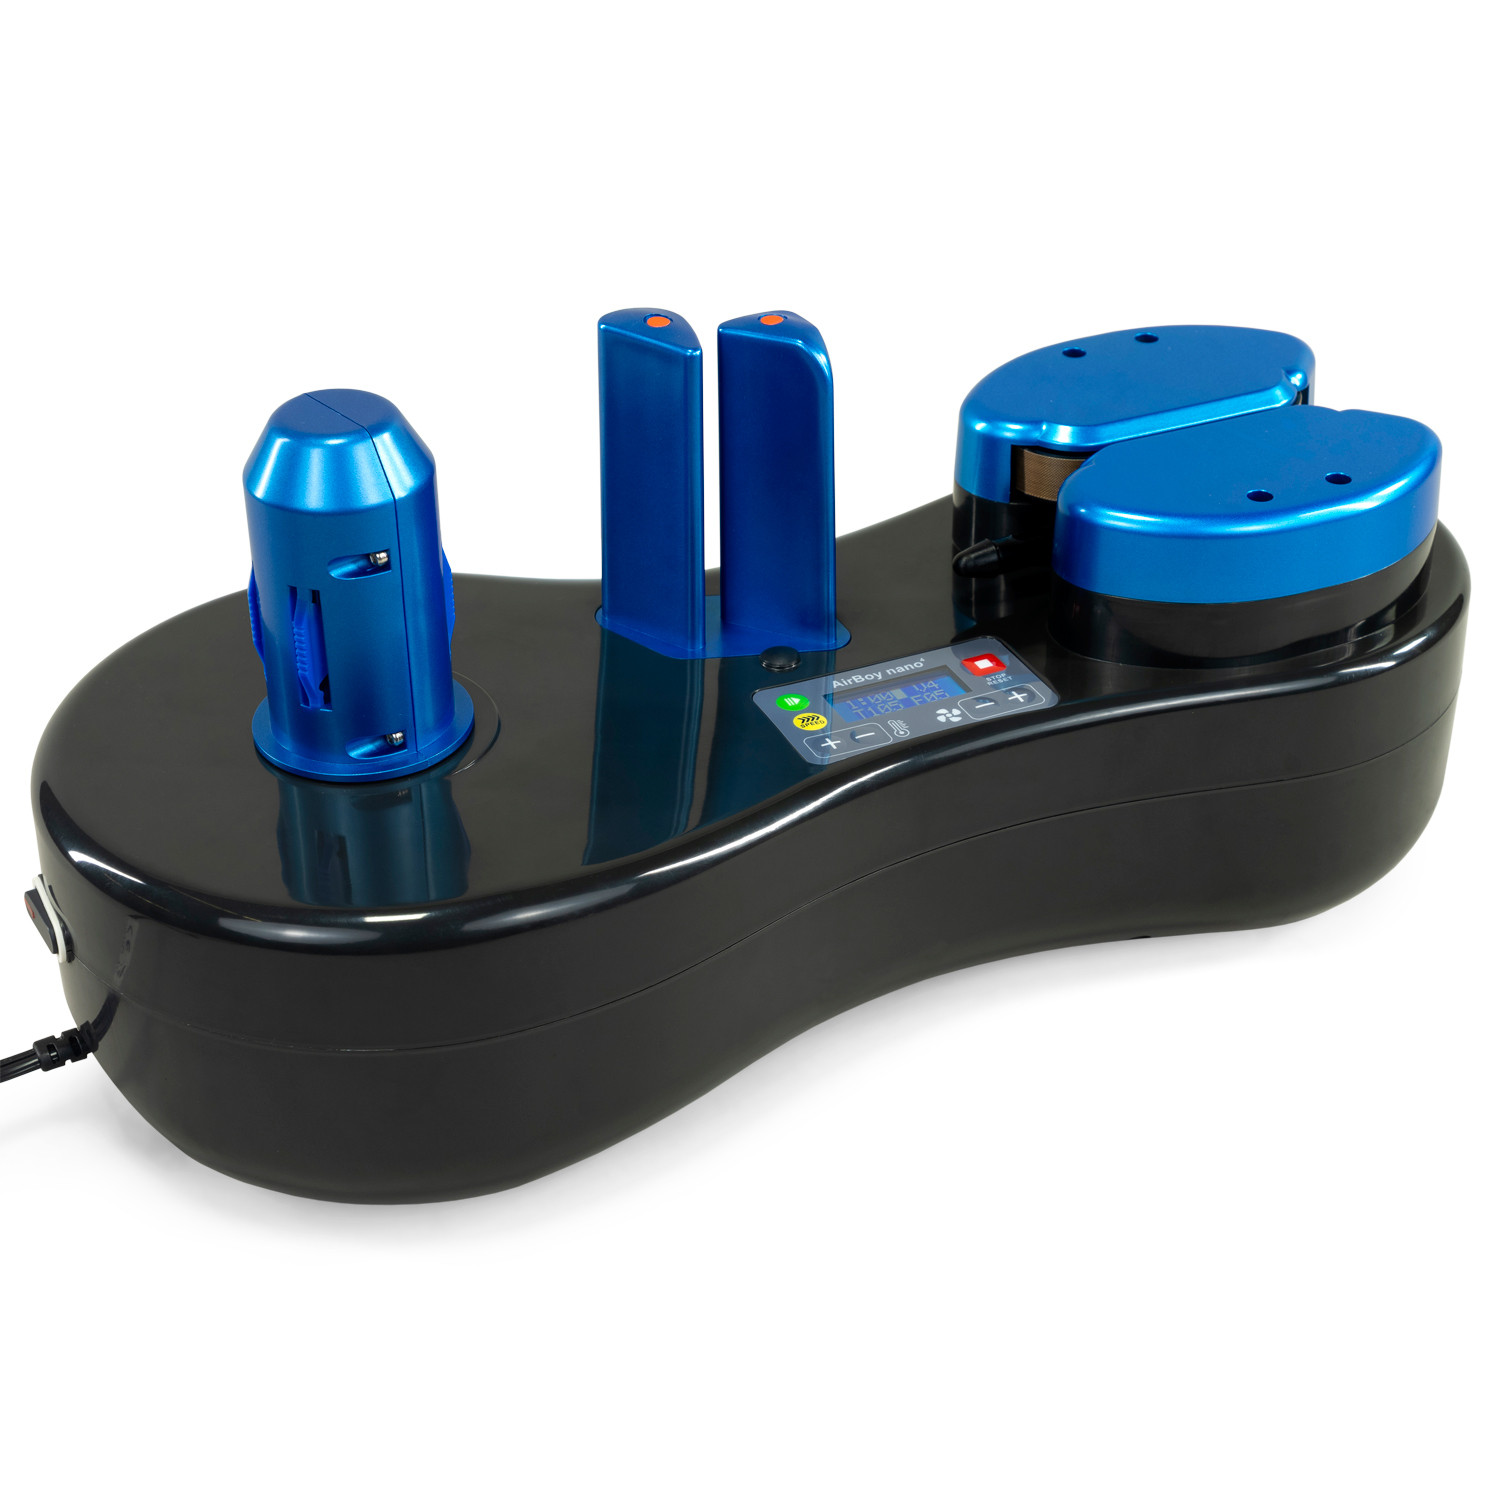 GTM-825A Electronic Kraft Tape Dispenser for Gummed Tapes up to 3” Width  buy in stock in U.S. in IDL Packaging